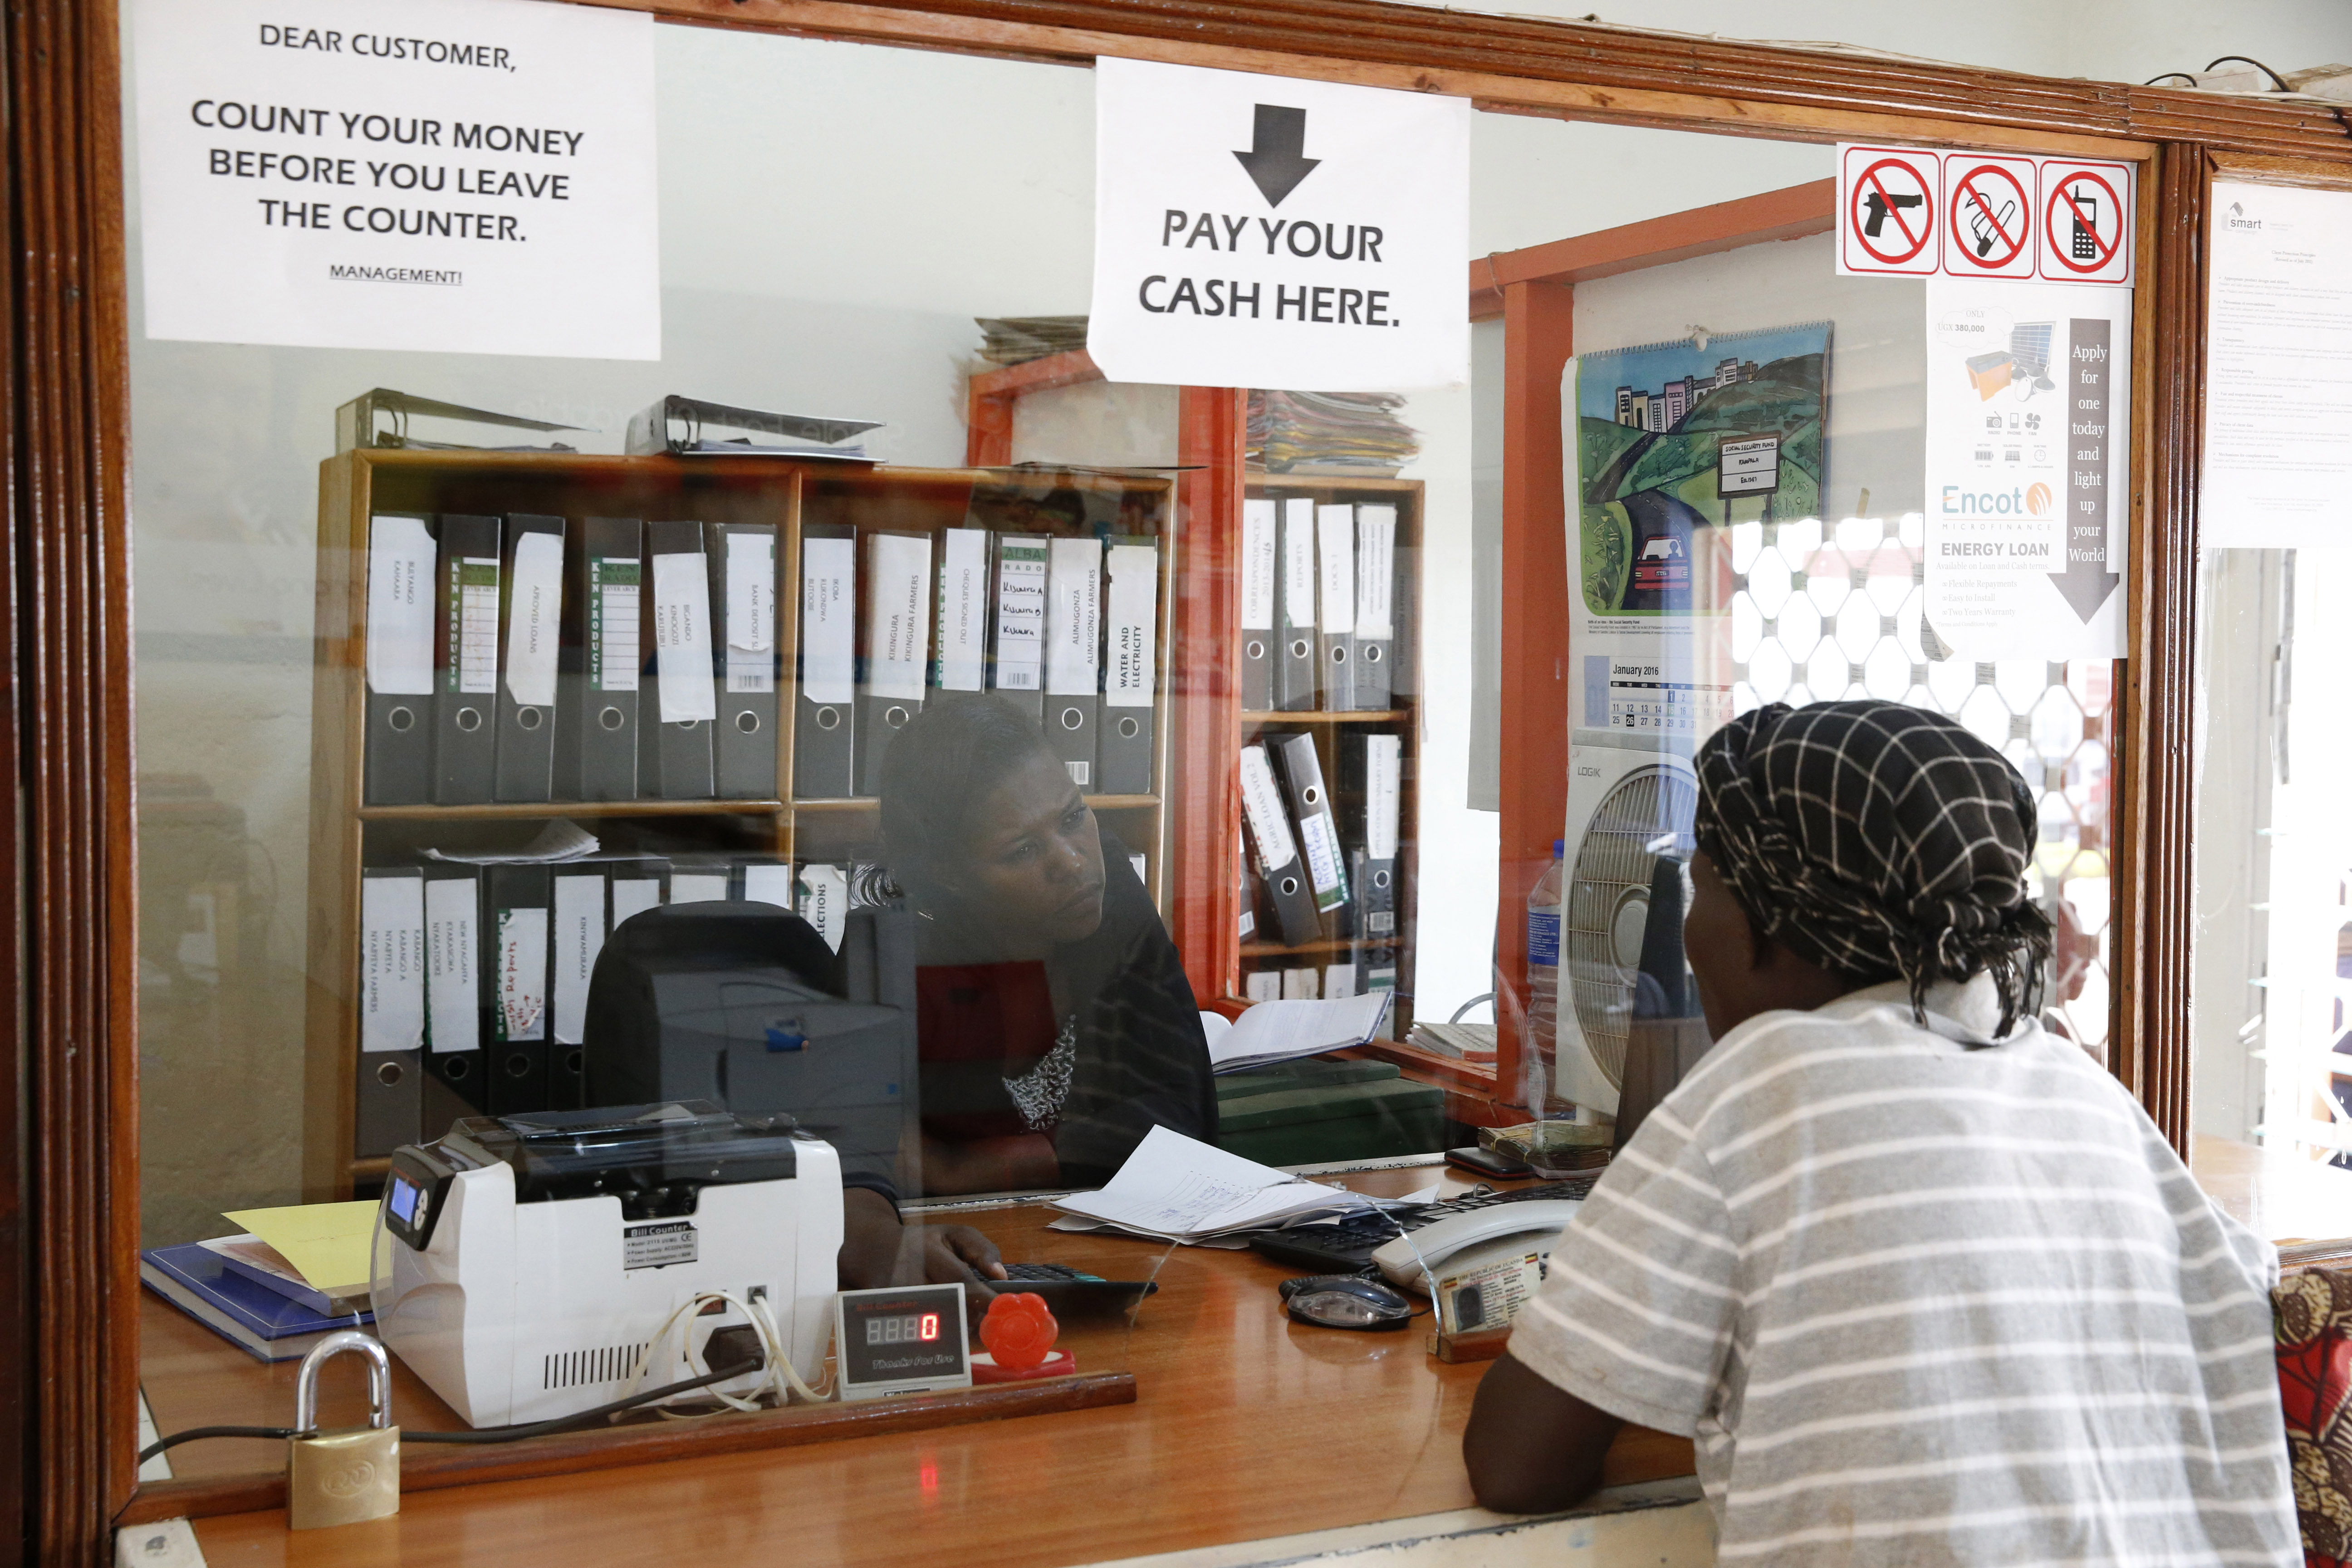 The microfinance institution accompanies clients who do not have access to traditional banks.